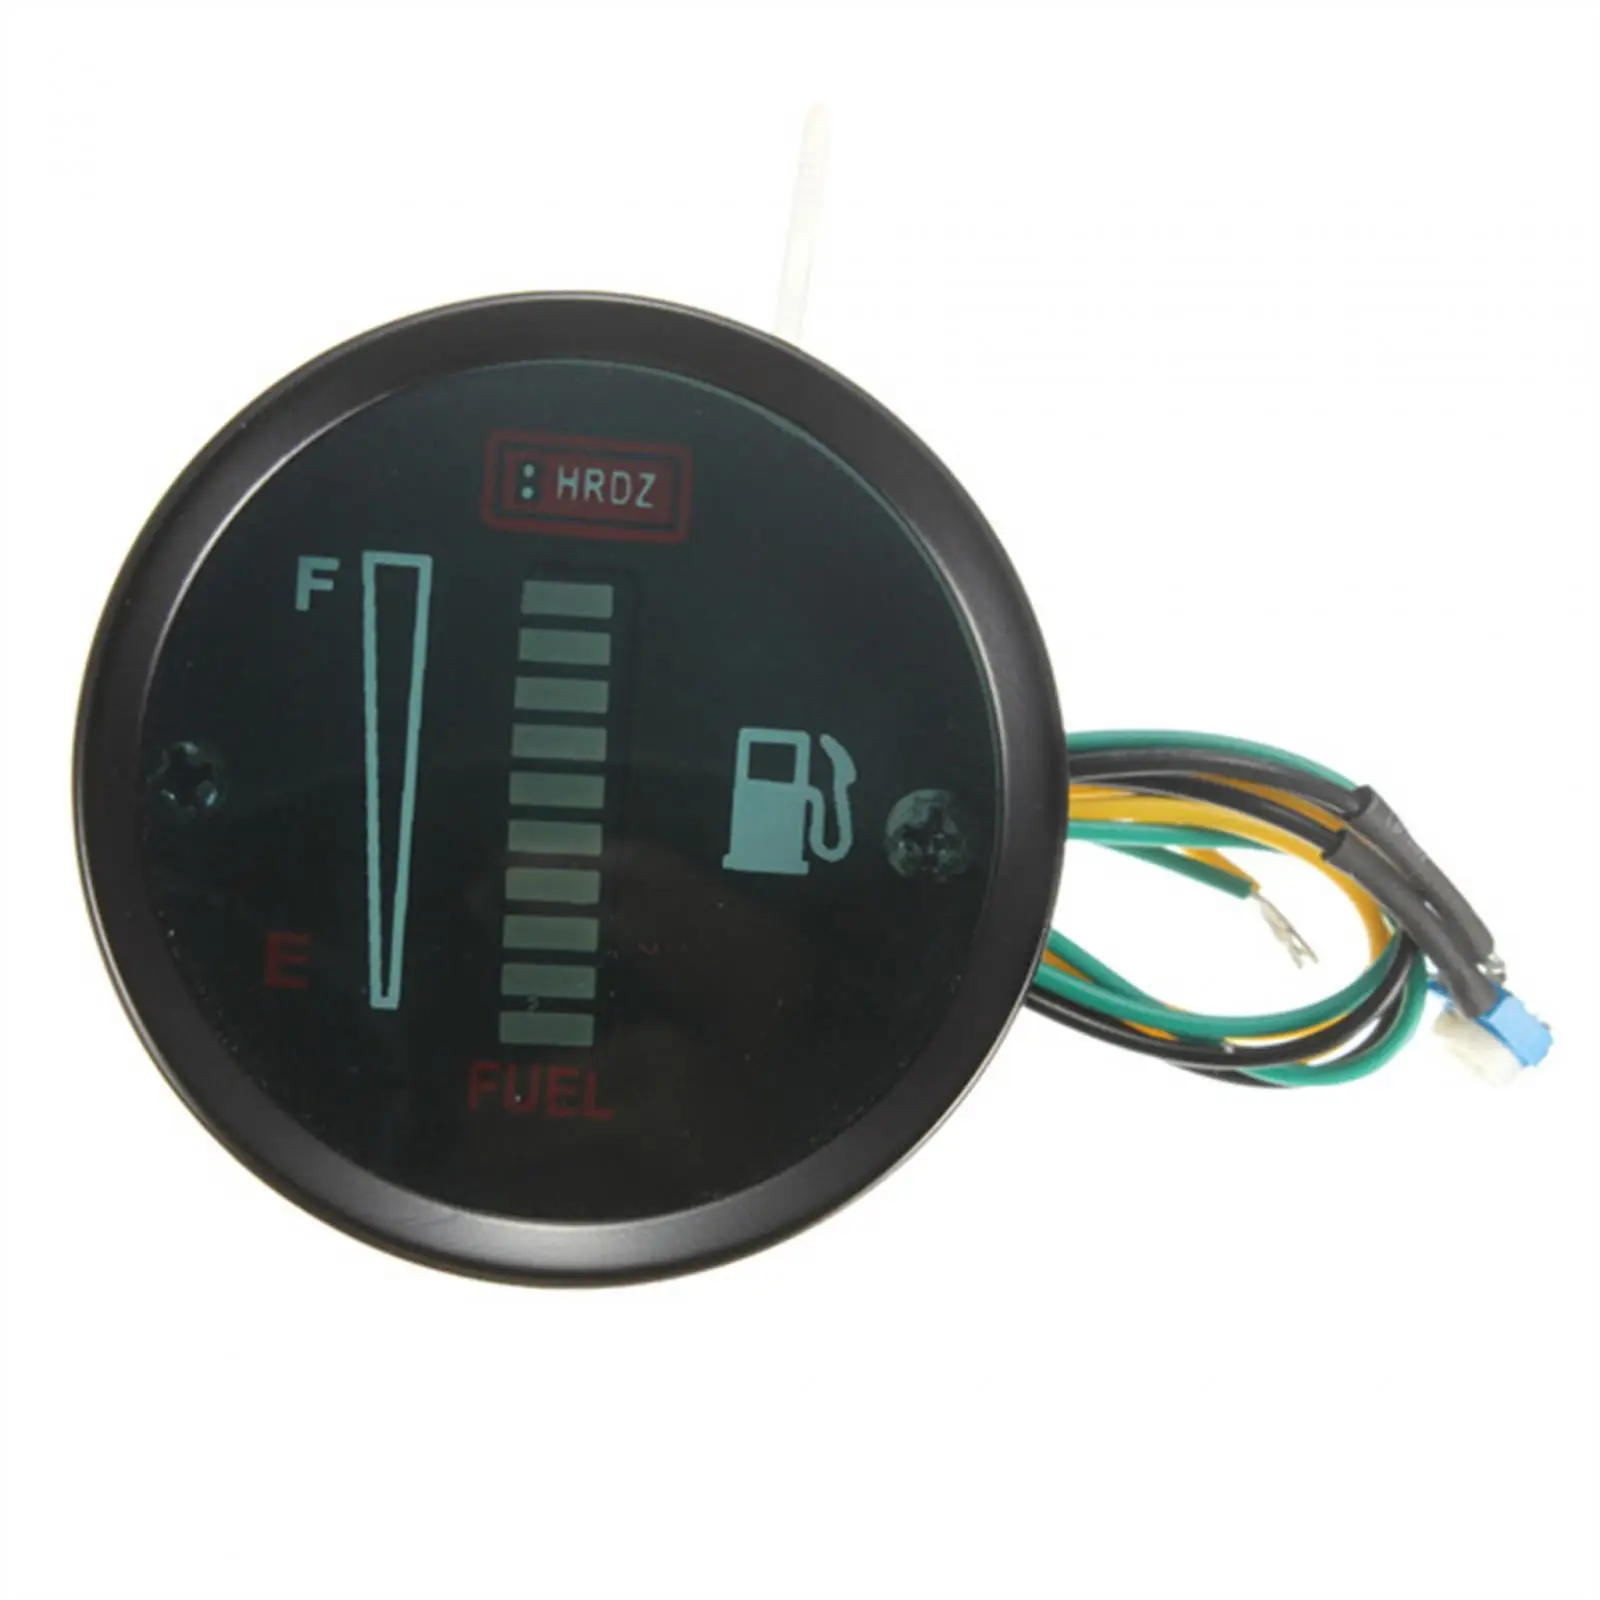 Car Motorcycle Fuel Level Meter Gauge Large Screen Fuel Tank Gauge Vehicles 1 Red LED Replacement Universal 8 Blue LED Display